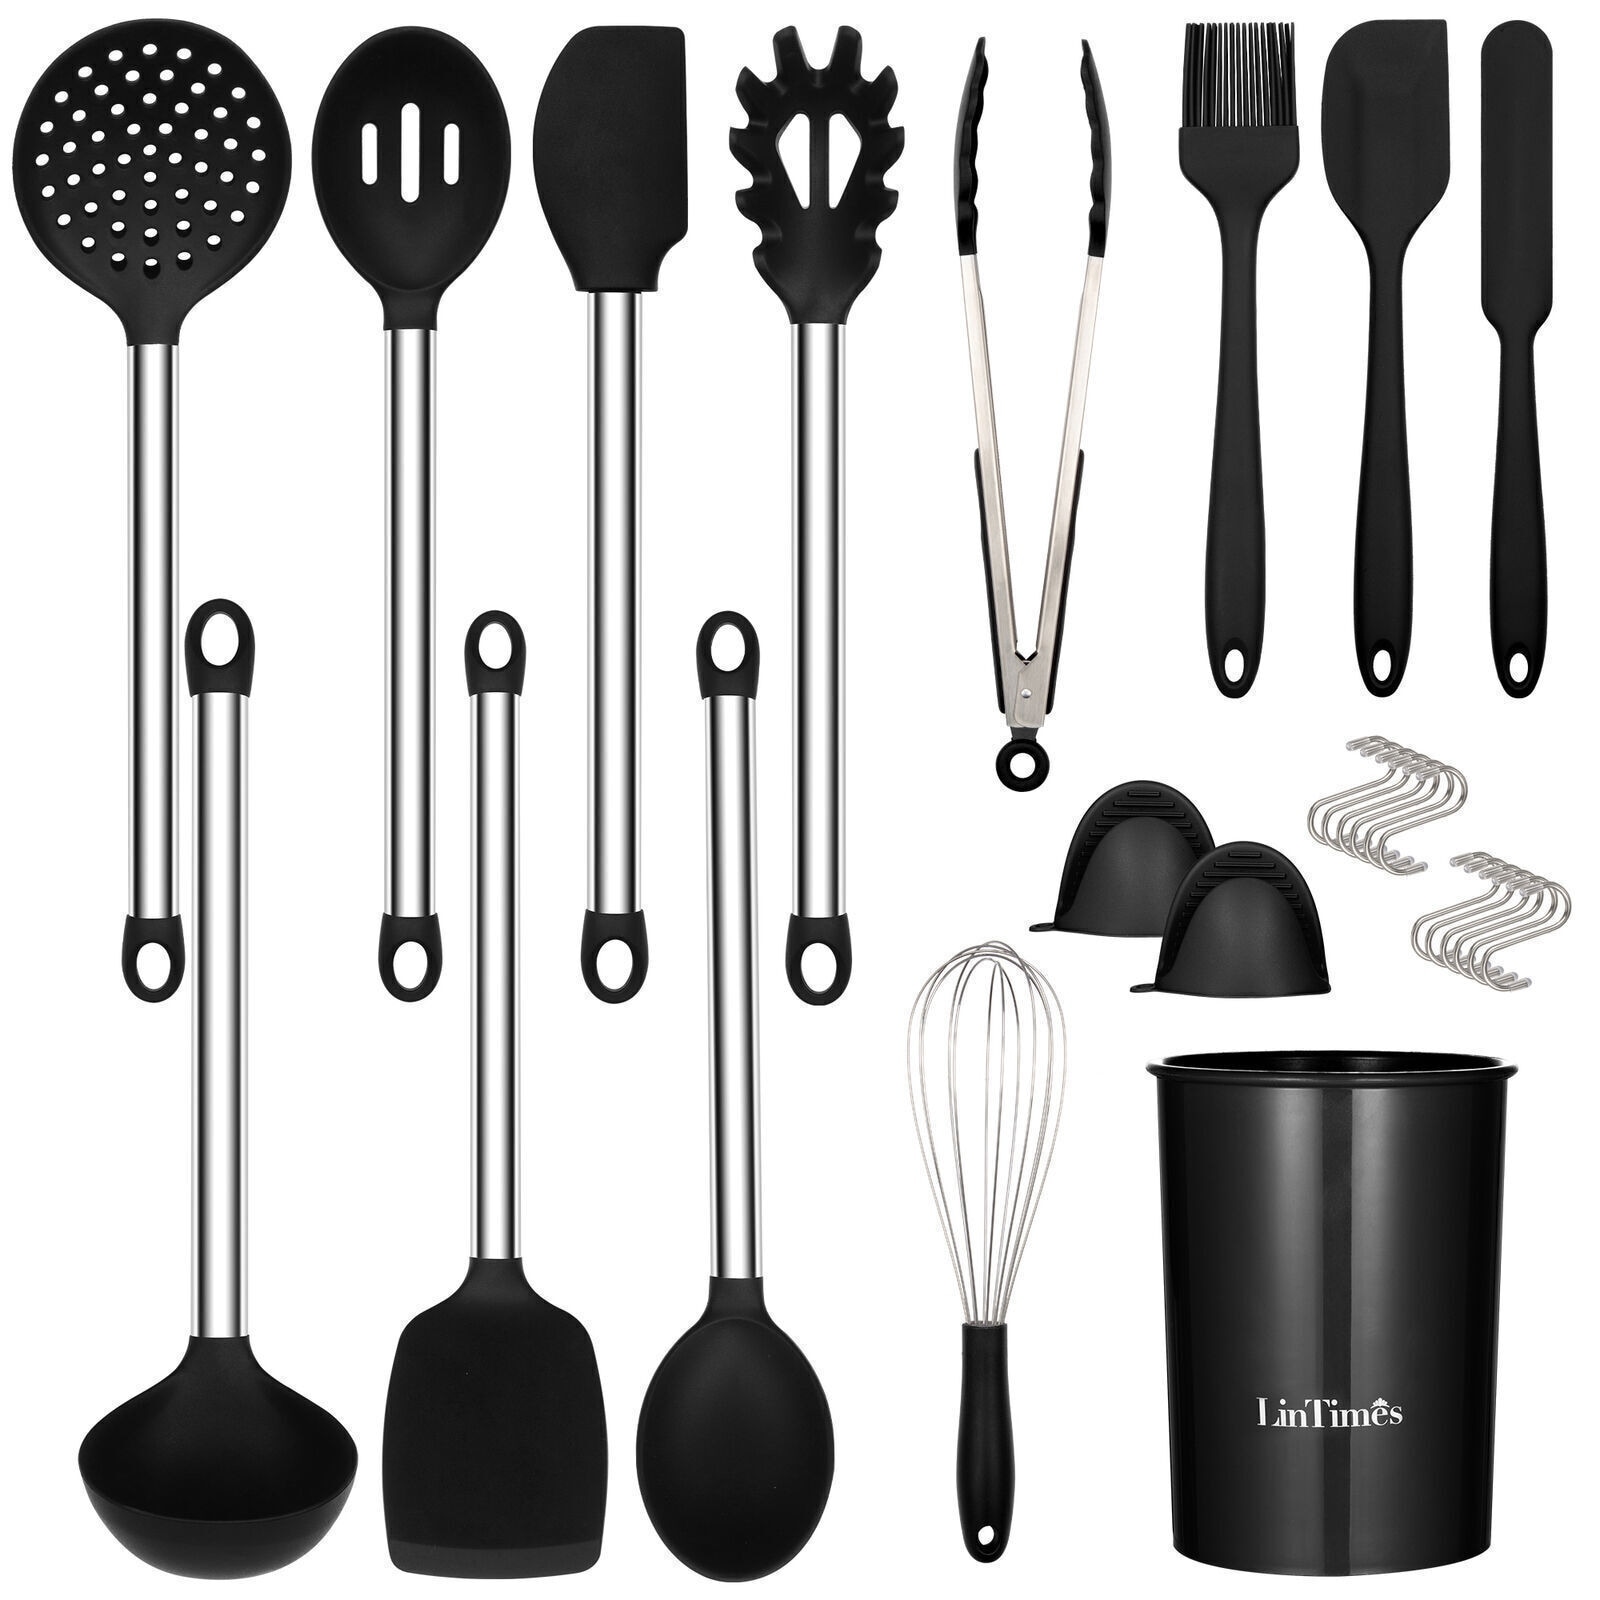 https://ak1.ostkcdn.com/images/products/is/images/direct/d927f2deac74858bb67b62a767733005102cc4de/27-Pcs-Silicone-Kitchen-Utensil-Set-with-Holder.jpg